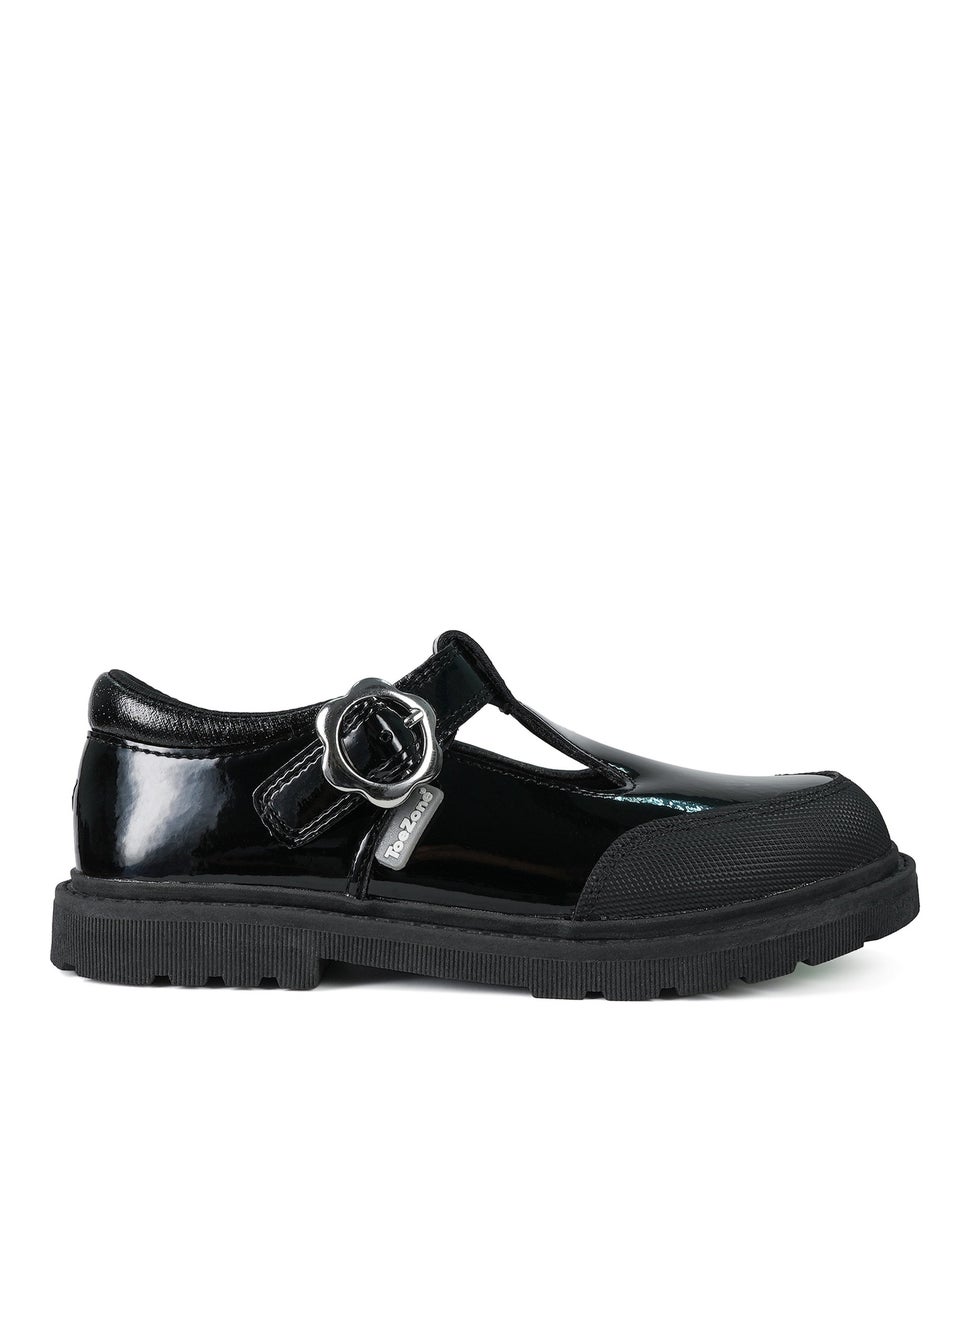 ToeZone Girls Black Clover Patent Coated Leather T-Bar Flower School Shoe (Younger 8 - Older 2)